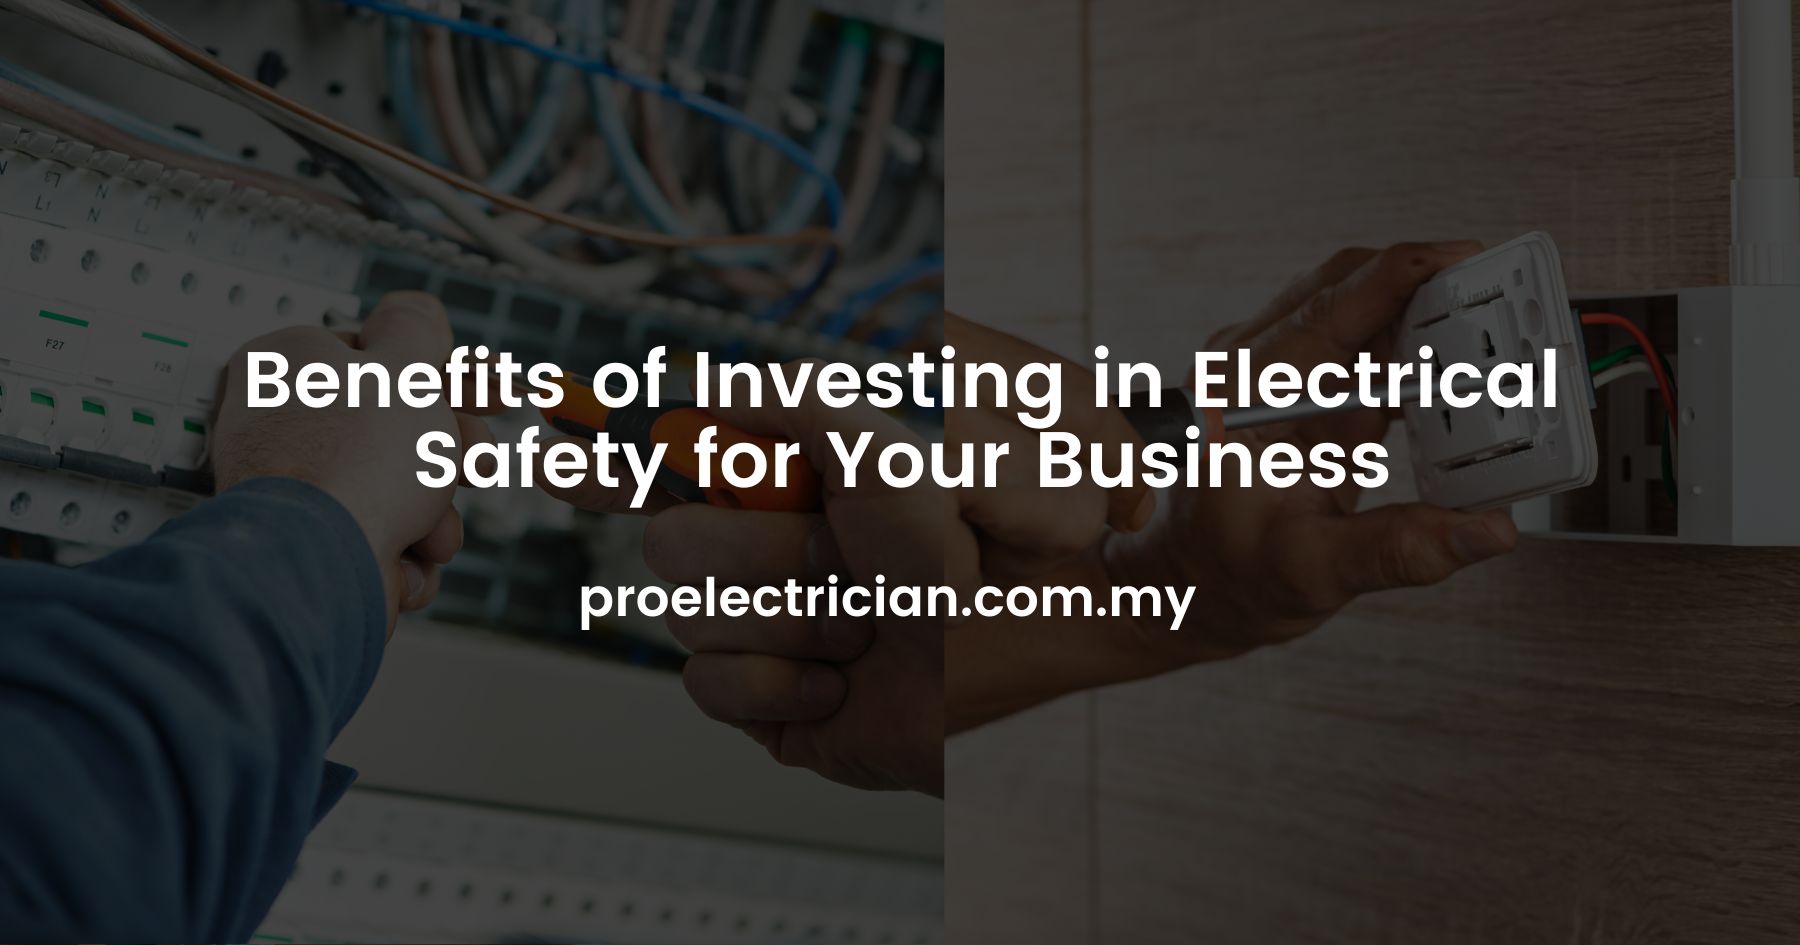 Benefits of Investing in Electrical Safety for Your Business